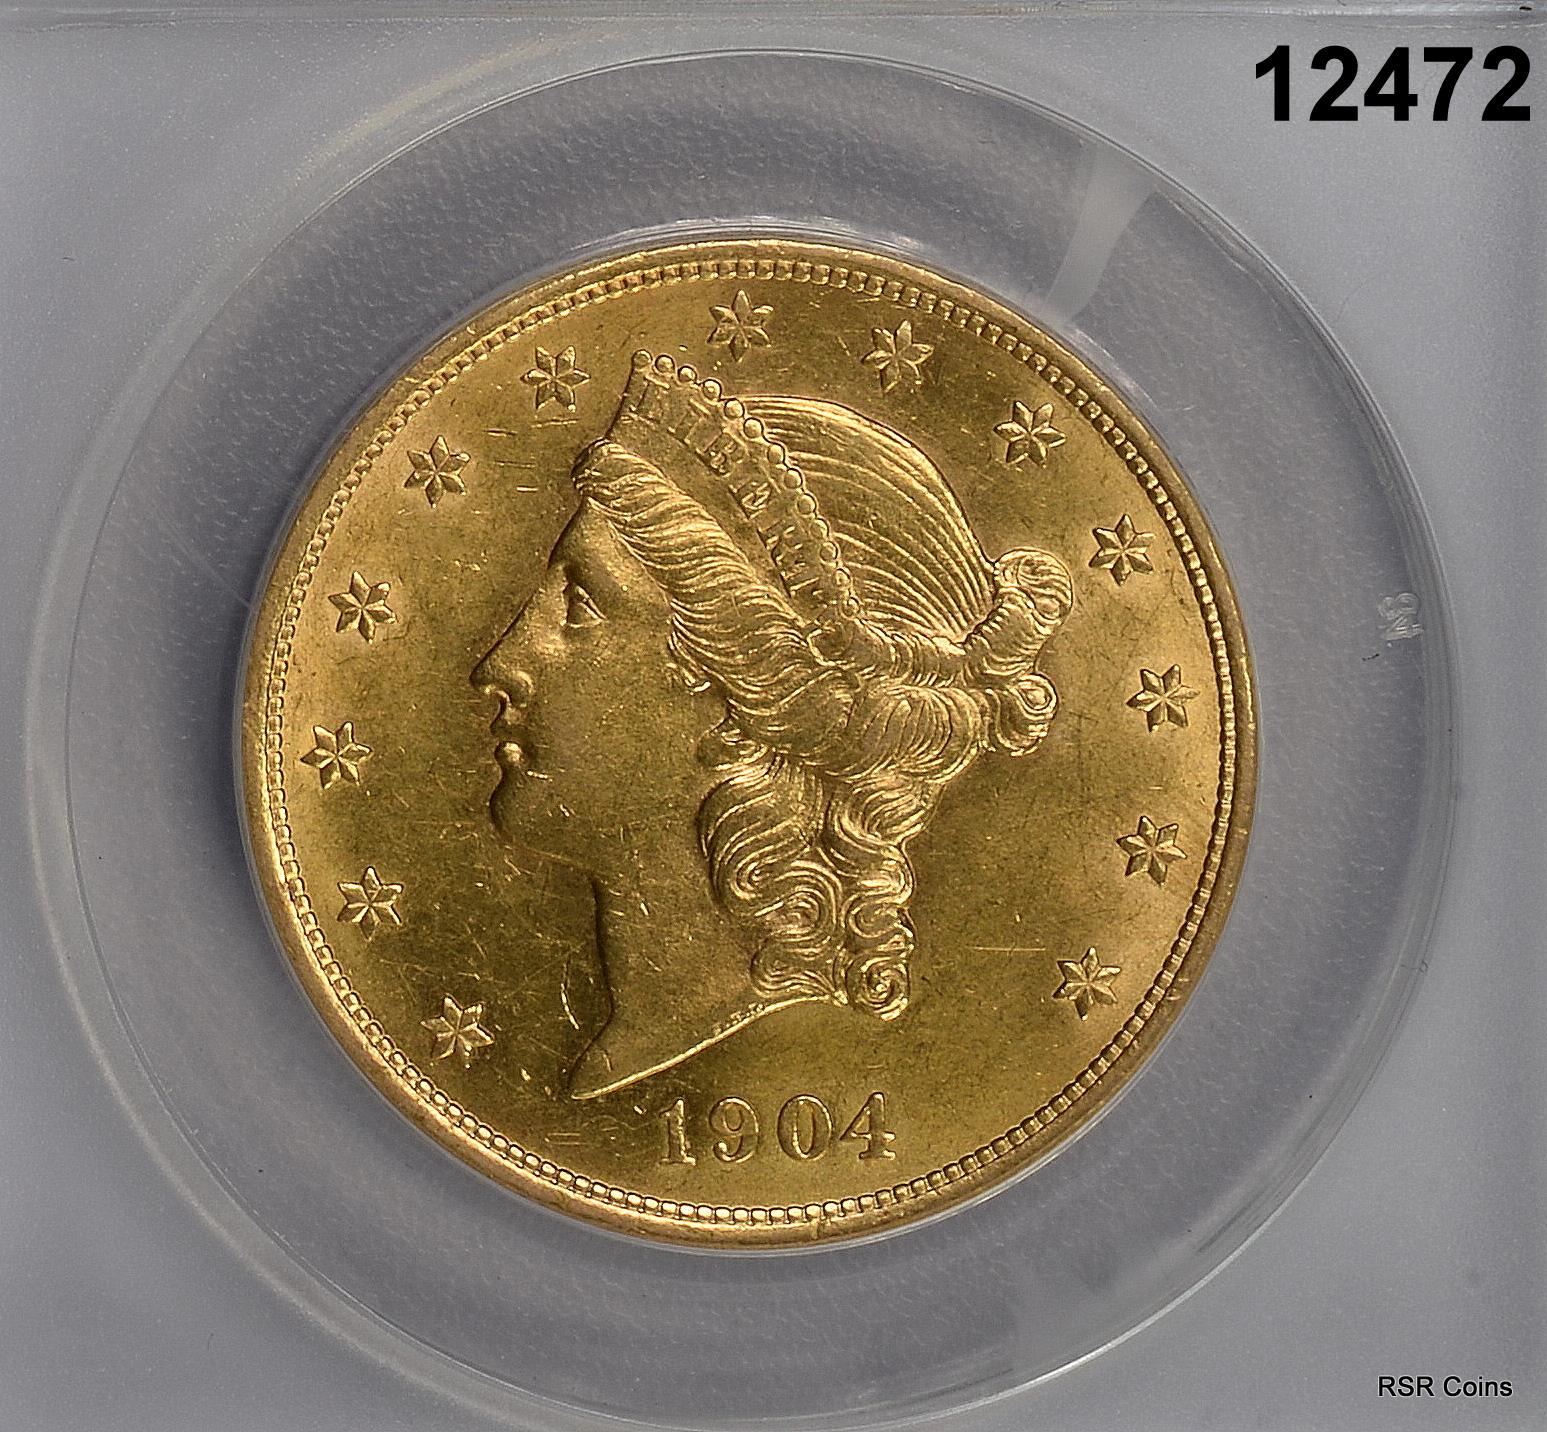 1904 $20 GOLD DOUBLE EAGLE LIBERTY ANACS CERTIFIED AU58 CLEANED NICE #12472